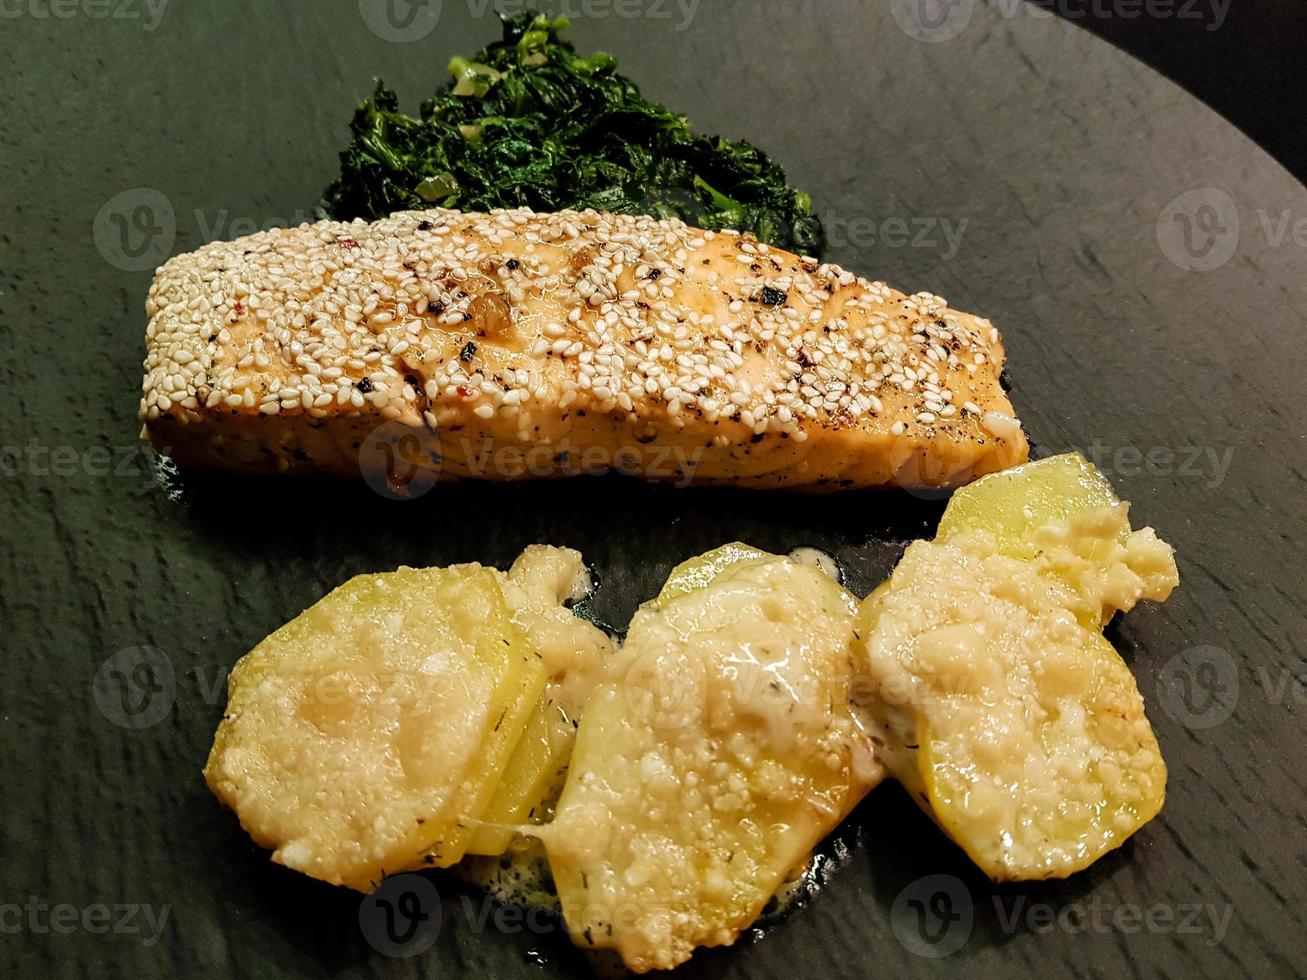 Salmon steak with creamed spinach and baked potatoes photo